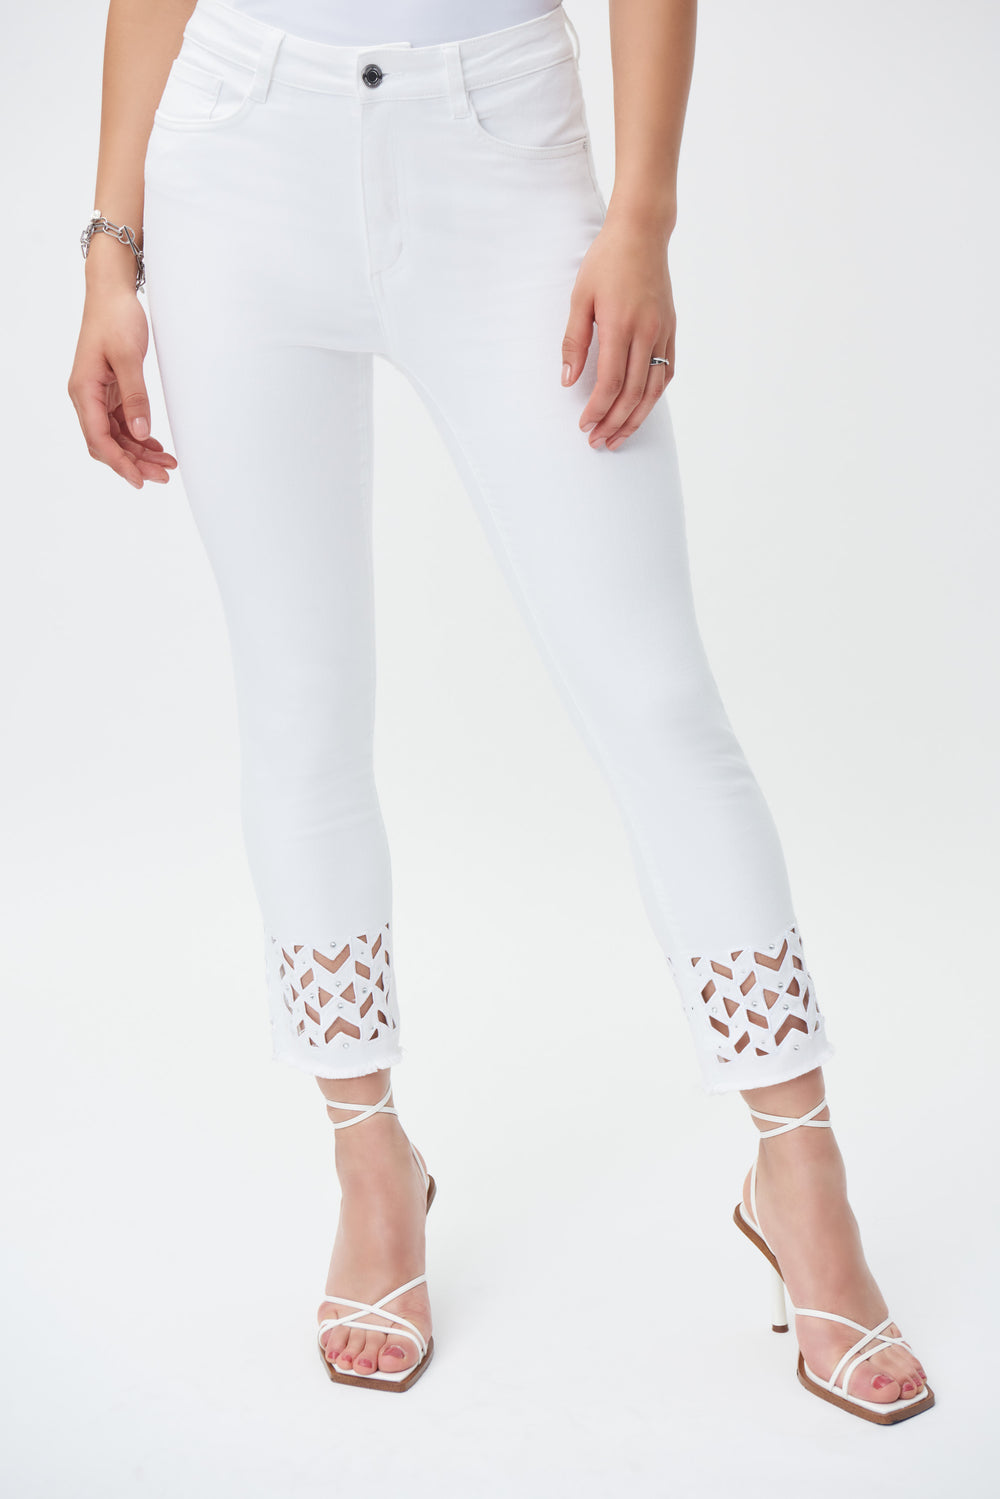 Joseph Ribkoff Spring 2023 women's casual white slim cropped jeans - front